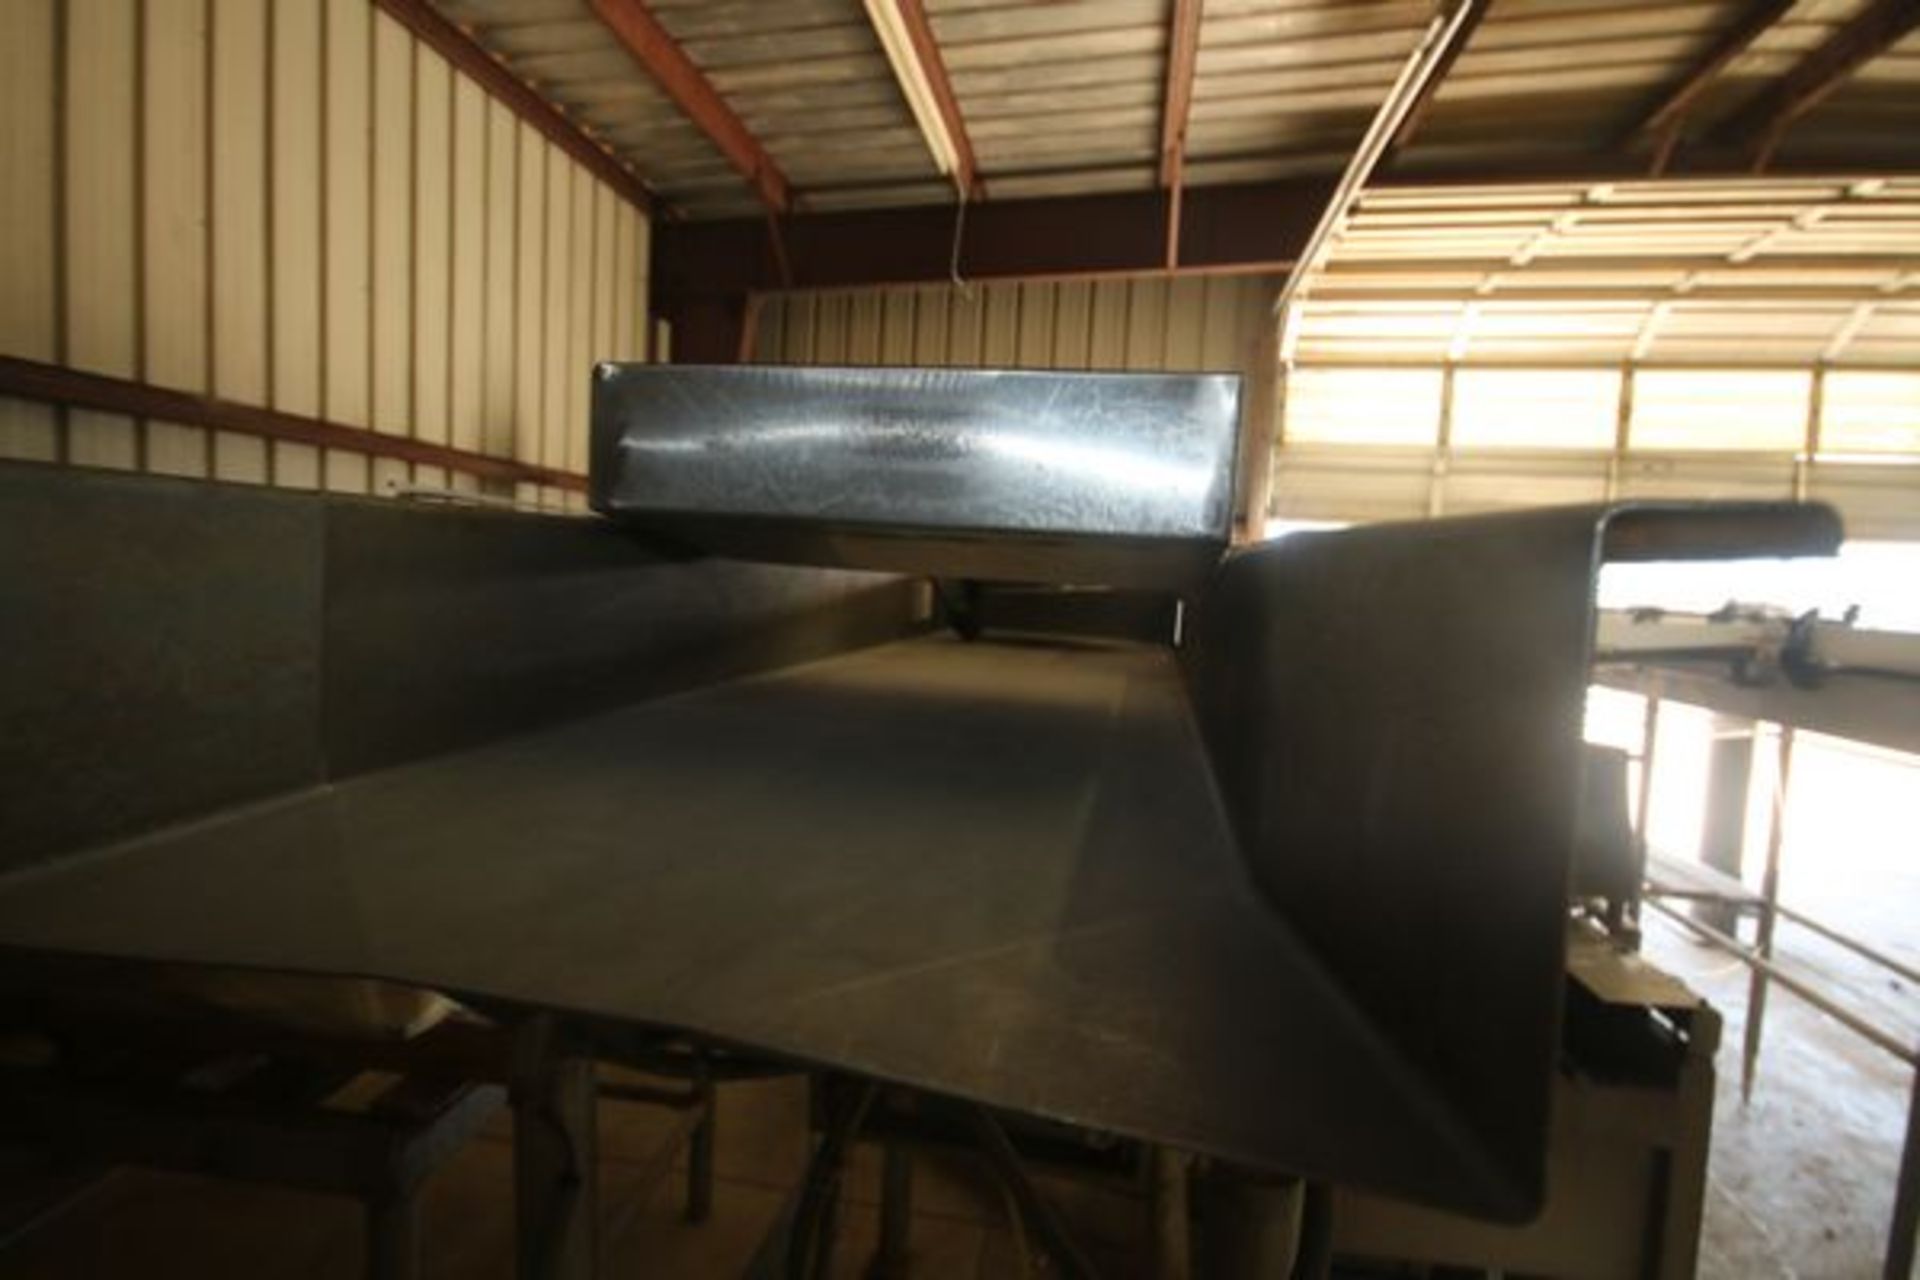 Triangle S/S Vibratory Conveyor, M/N SE1806-6, S/N 15955, 18" Wide x 72" Long (BG79) ***Located in - Image 2 of 4